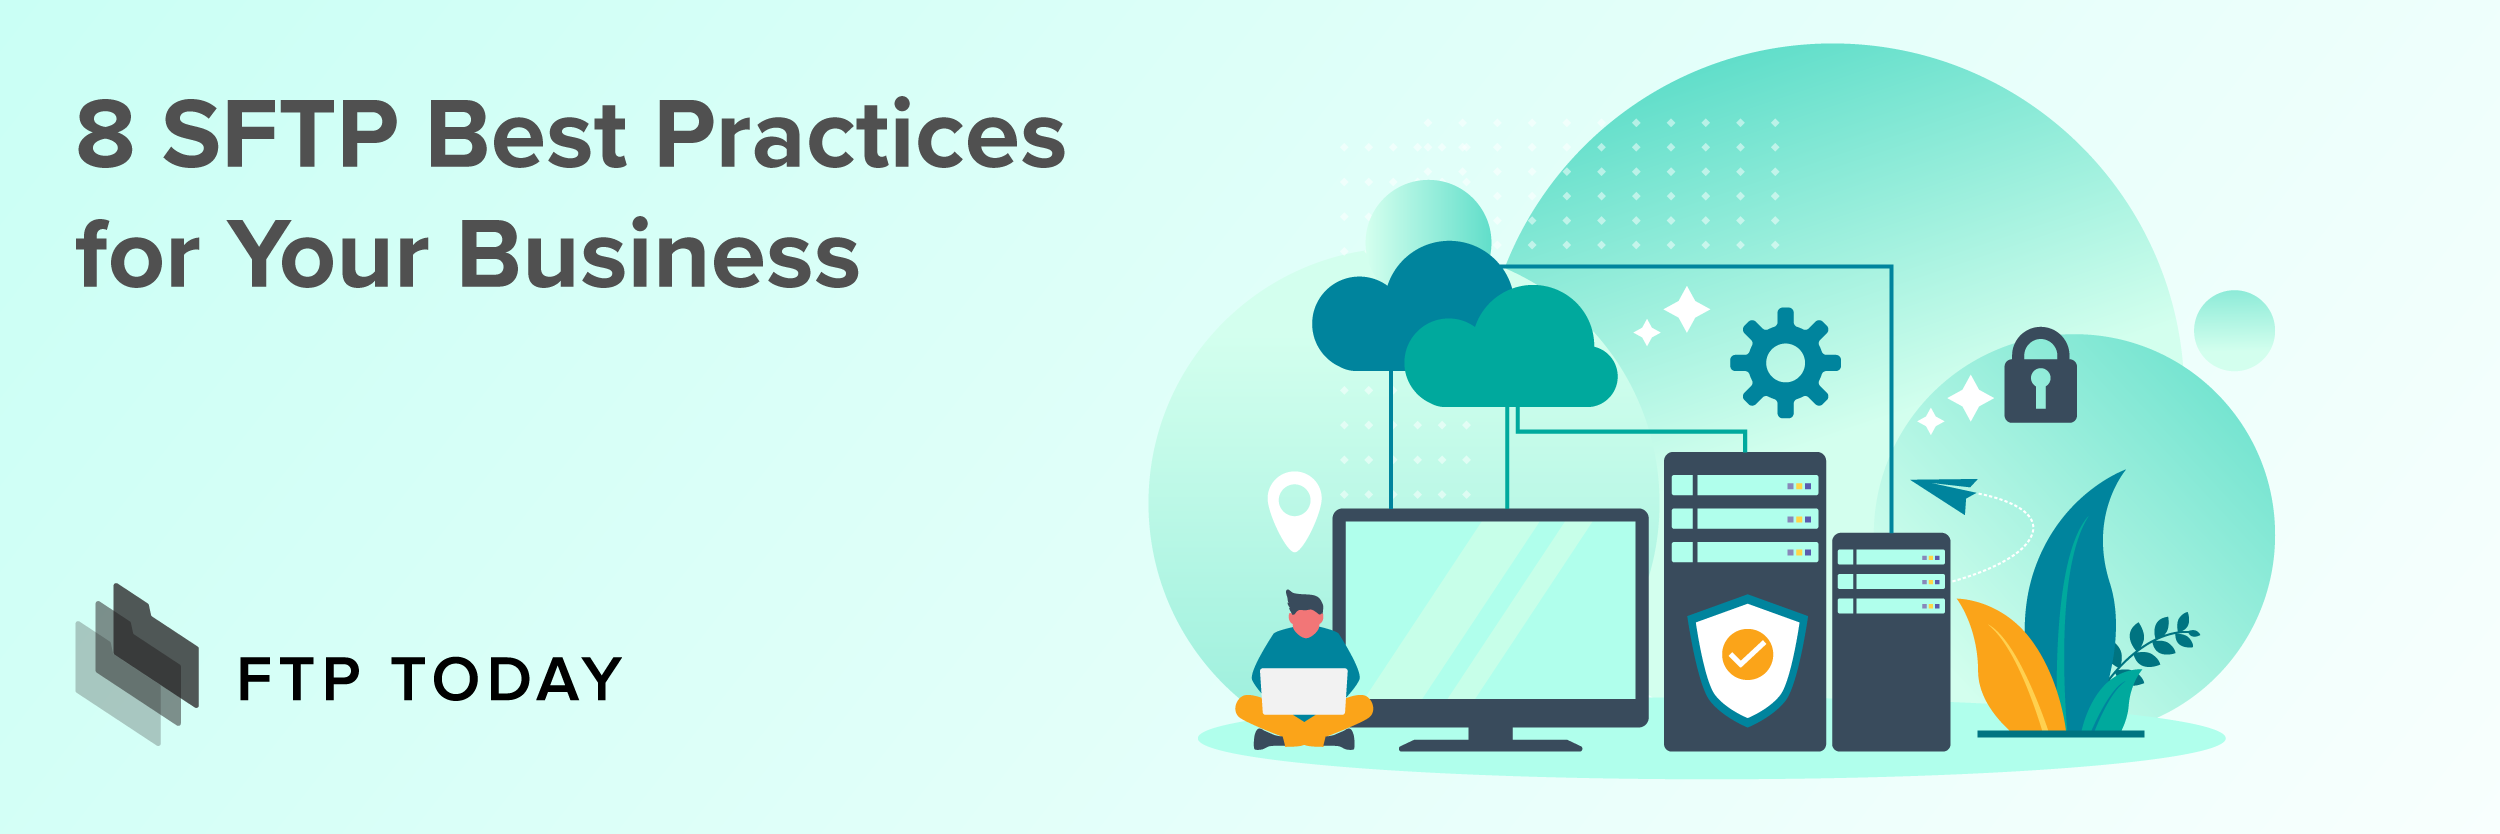 8 SFTP Best Practices for Your Business